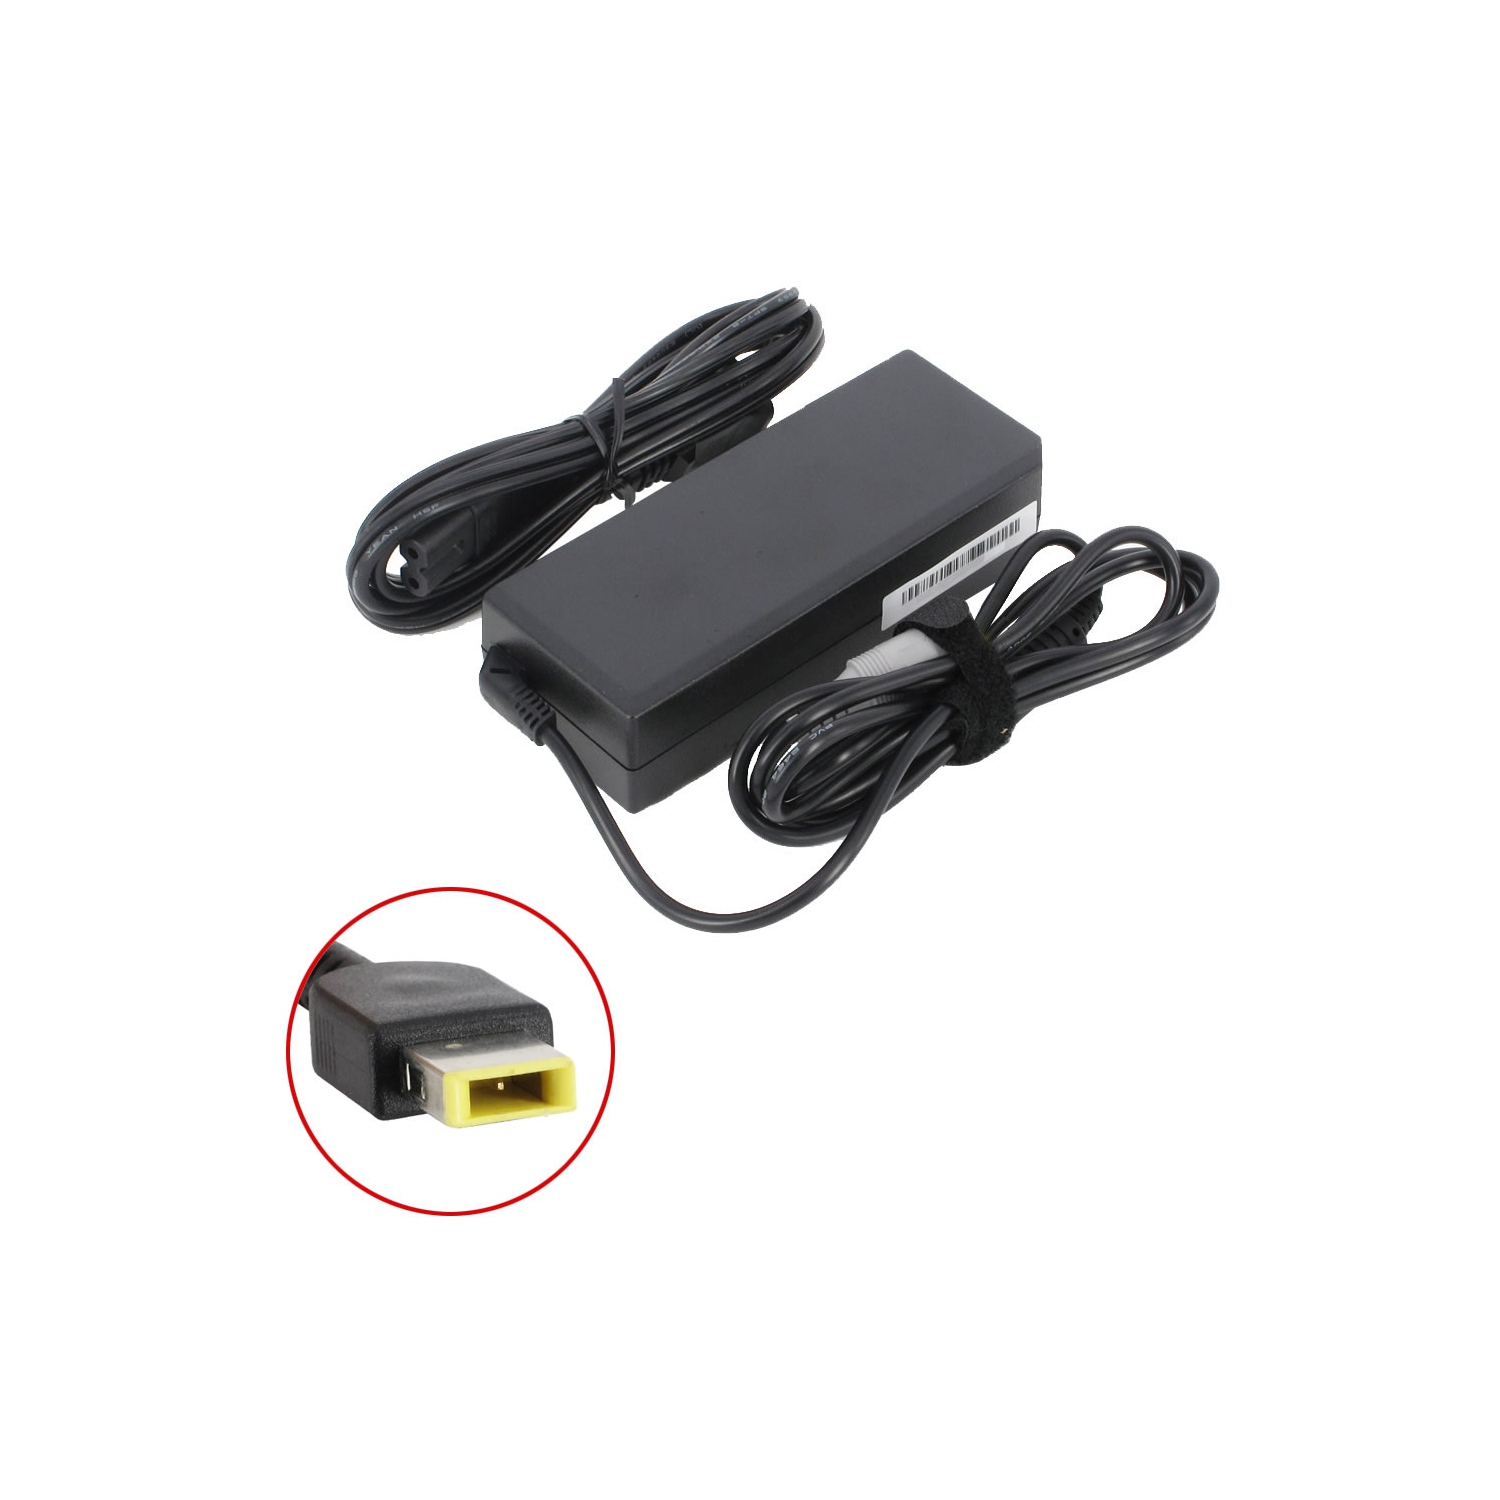 Brand New Laptop AC Adapter for Lenovo G50-75, 0B47455, 45N0247, ADLX45NDC3A, ADLX65NLC3A, 36200235